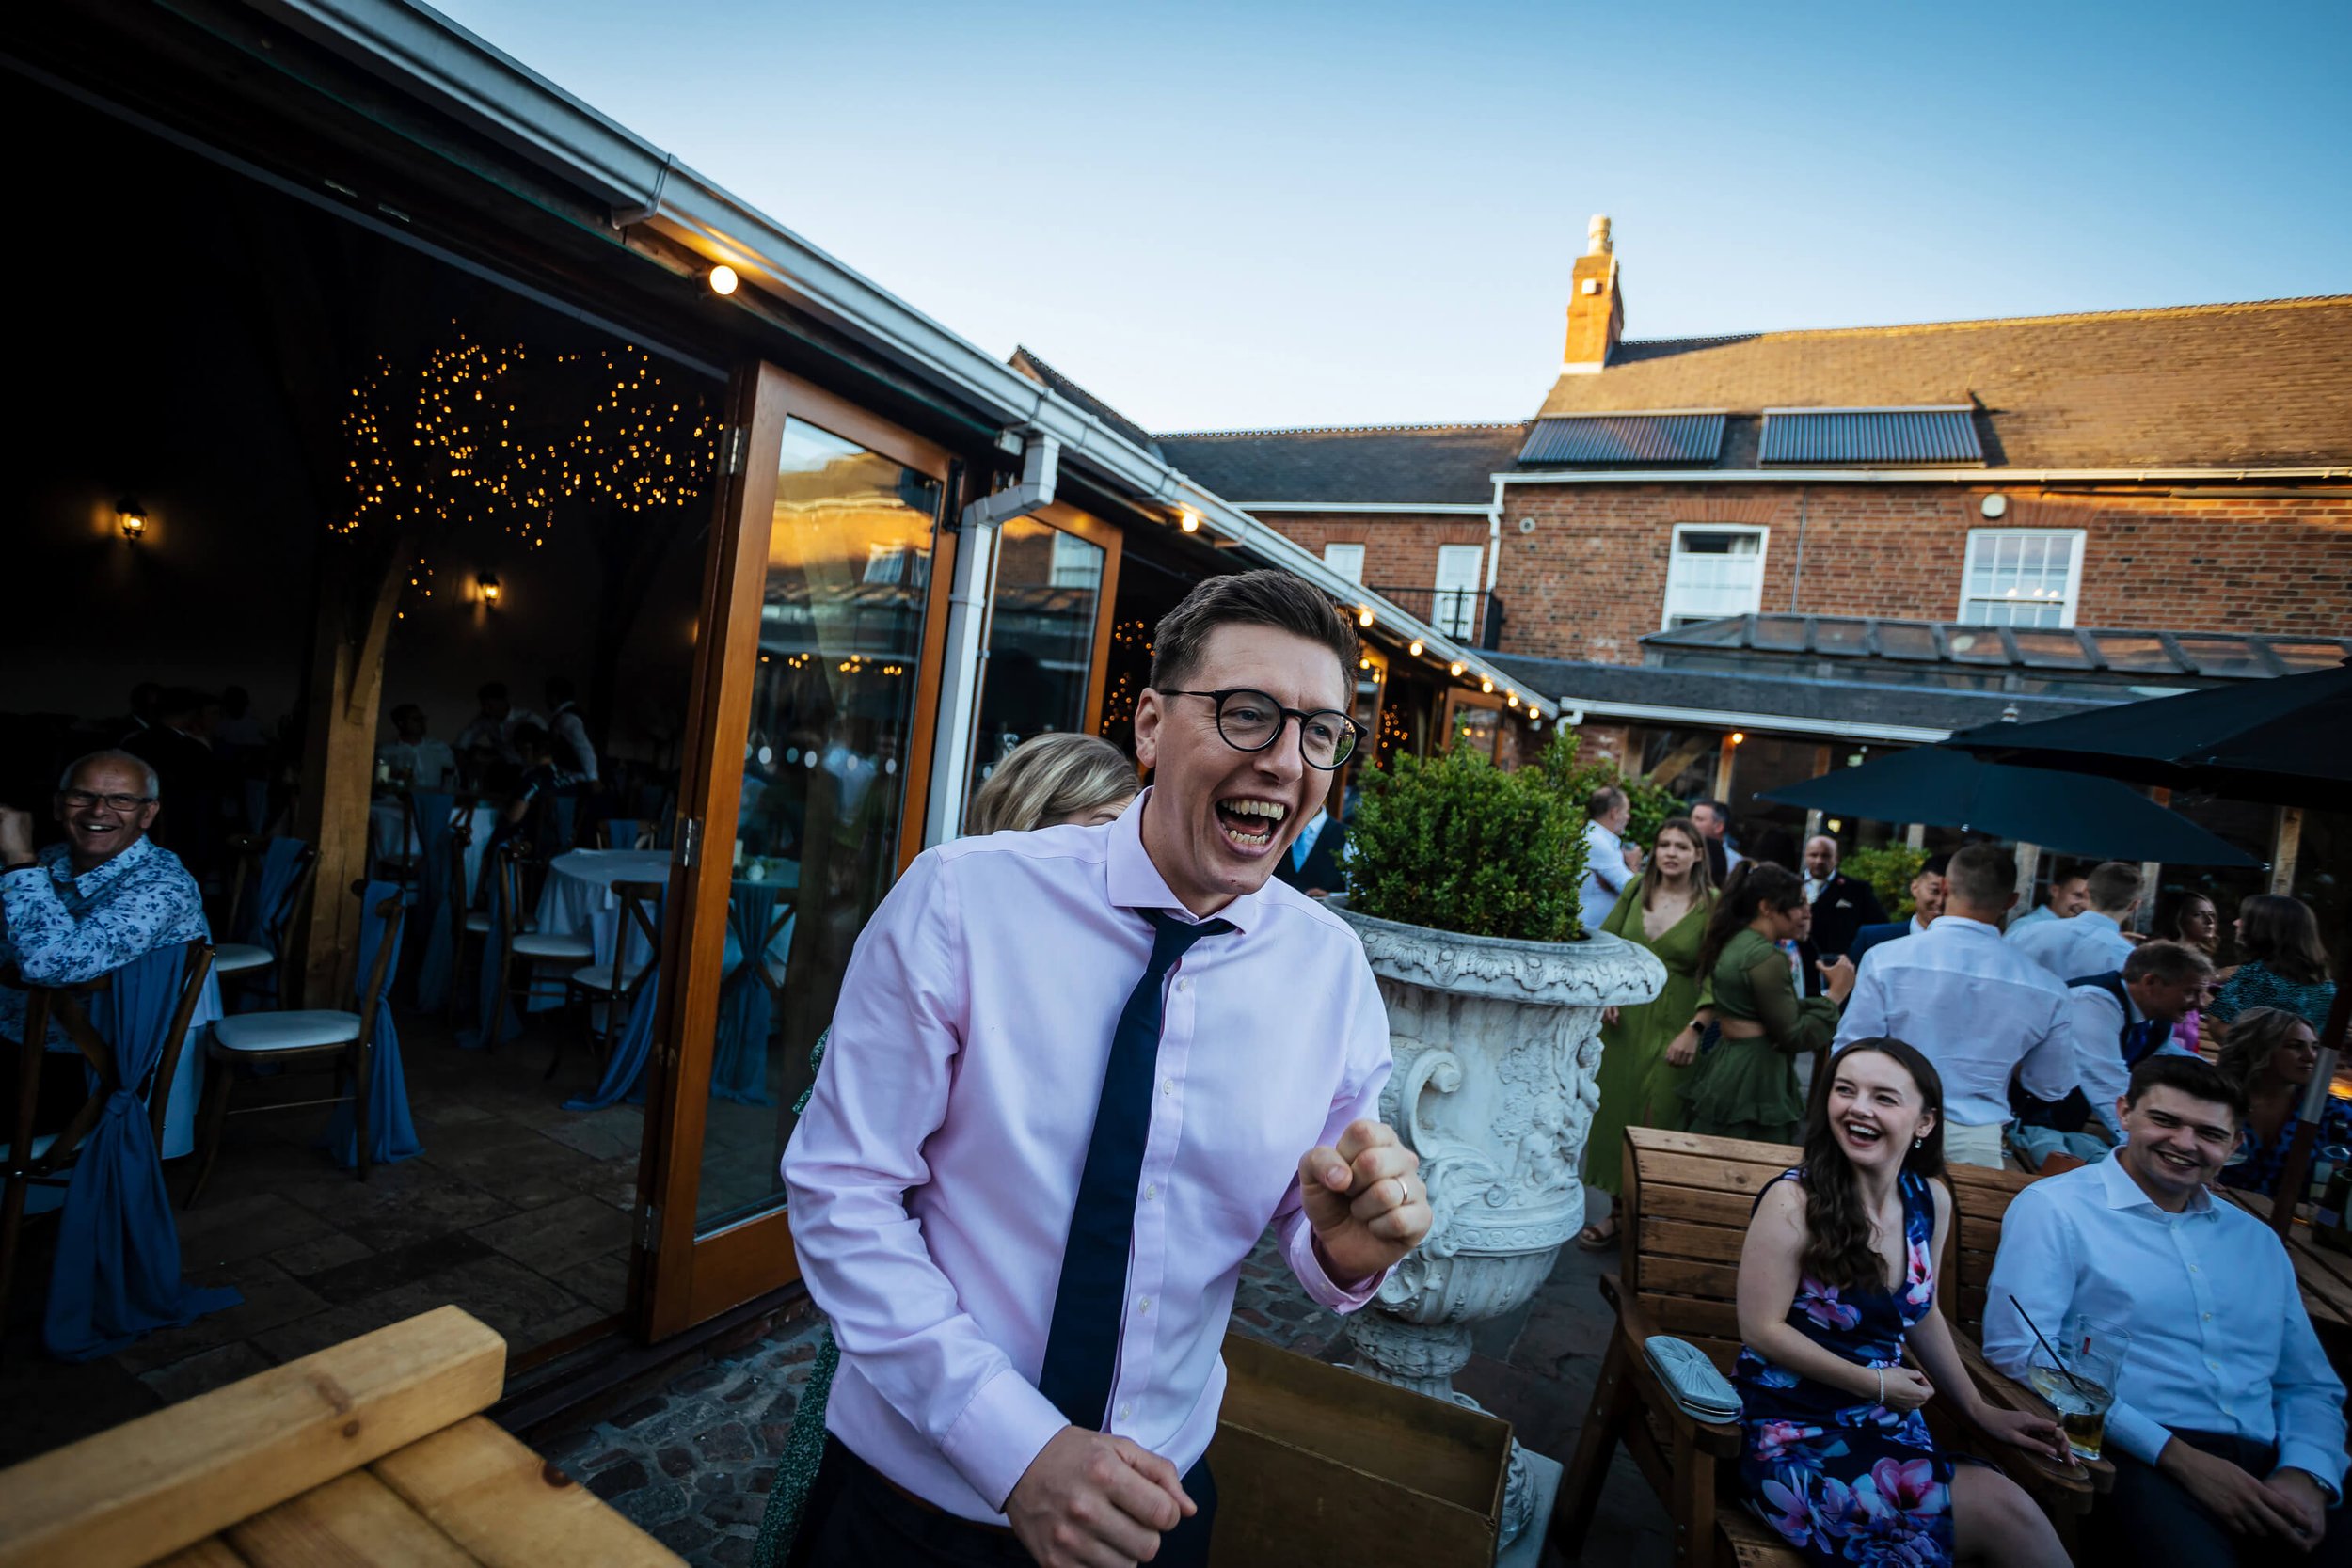 Silly guests causing trouble at a Swancar Farm wedding